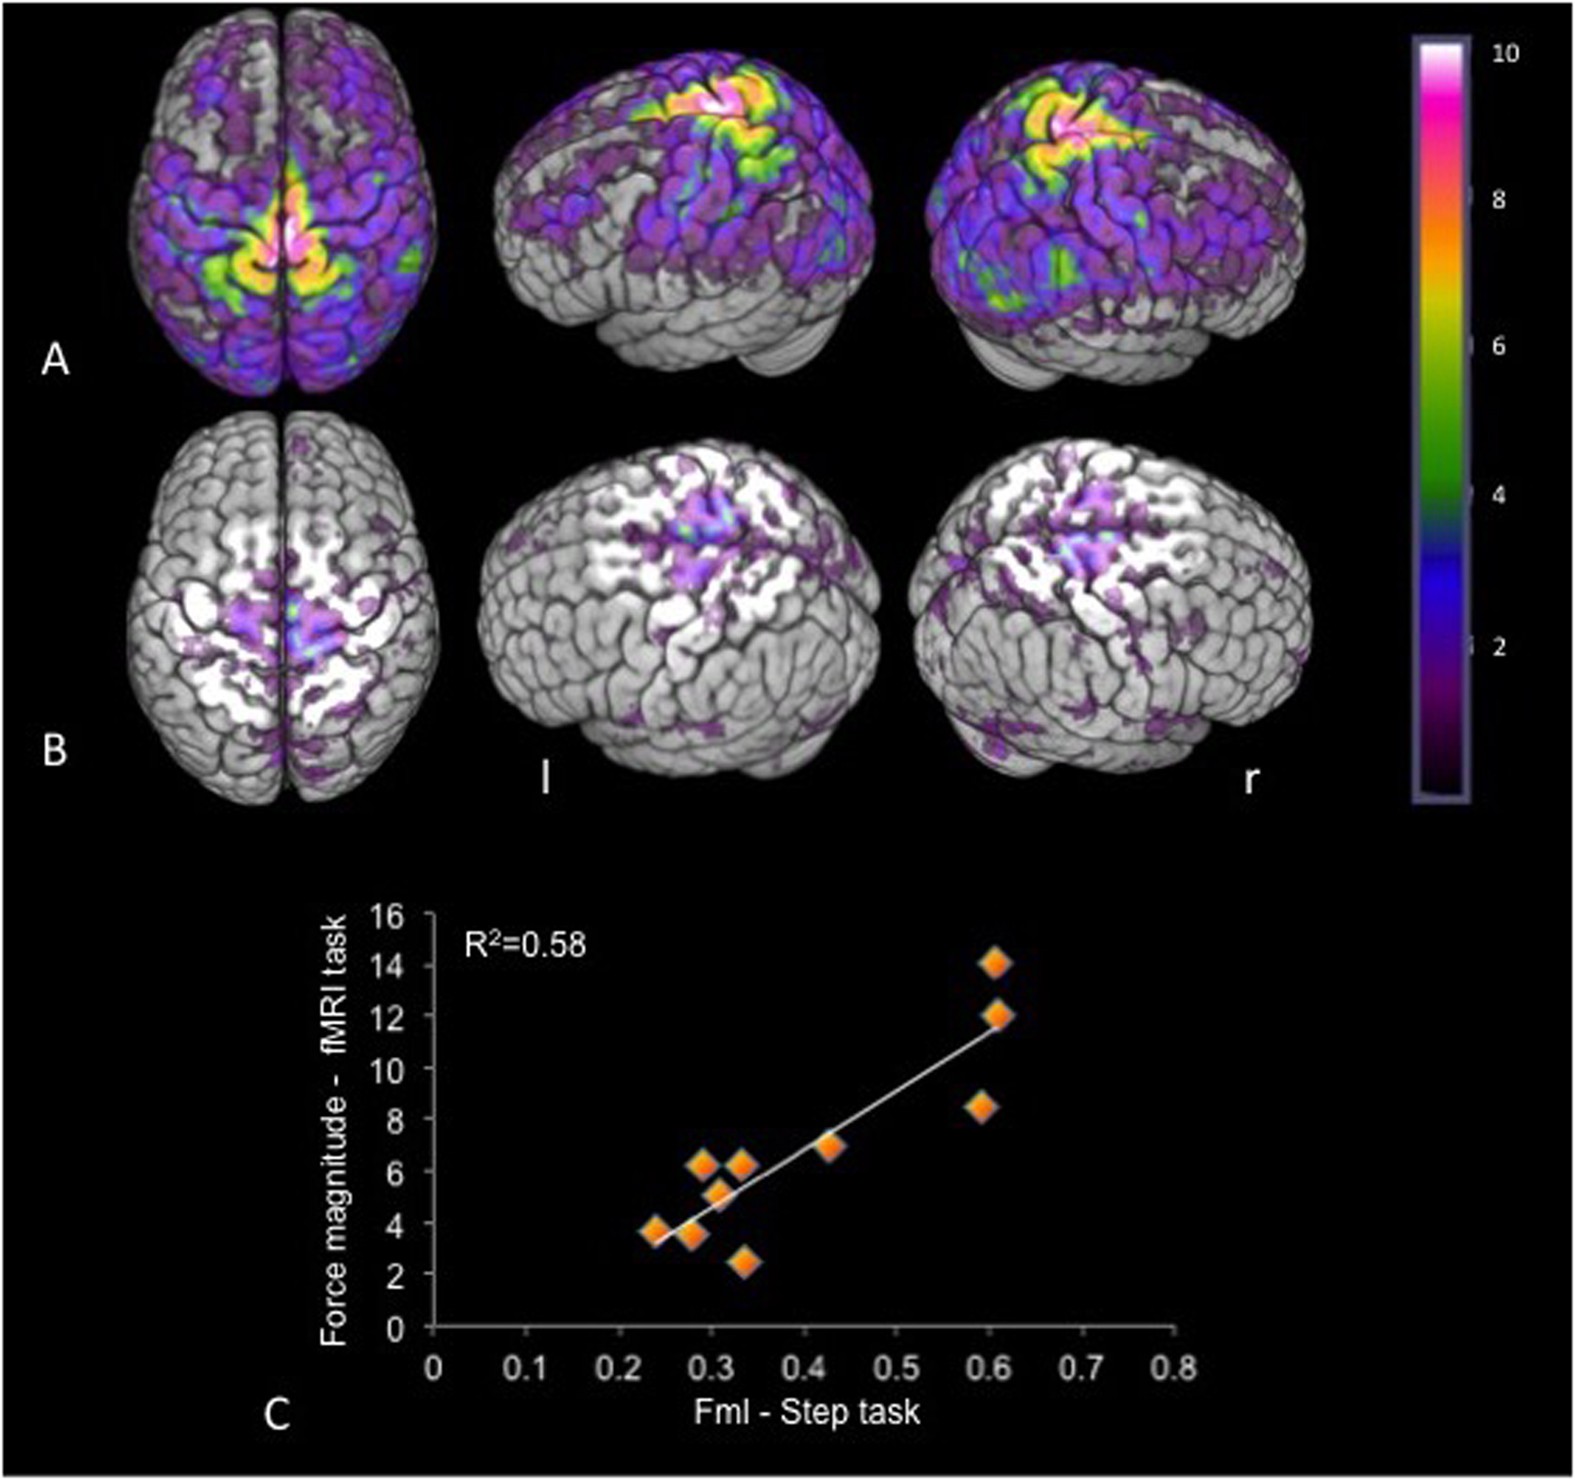 An fMRI-compatible force measurement system for the evaluation of the  neural correlates of step initiation | Scientific Reports